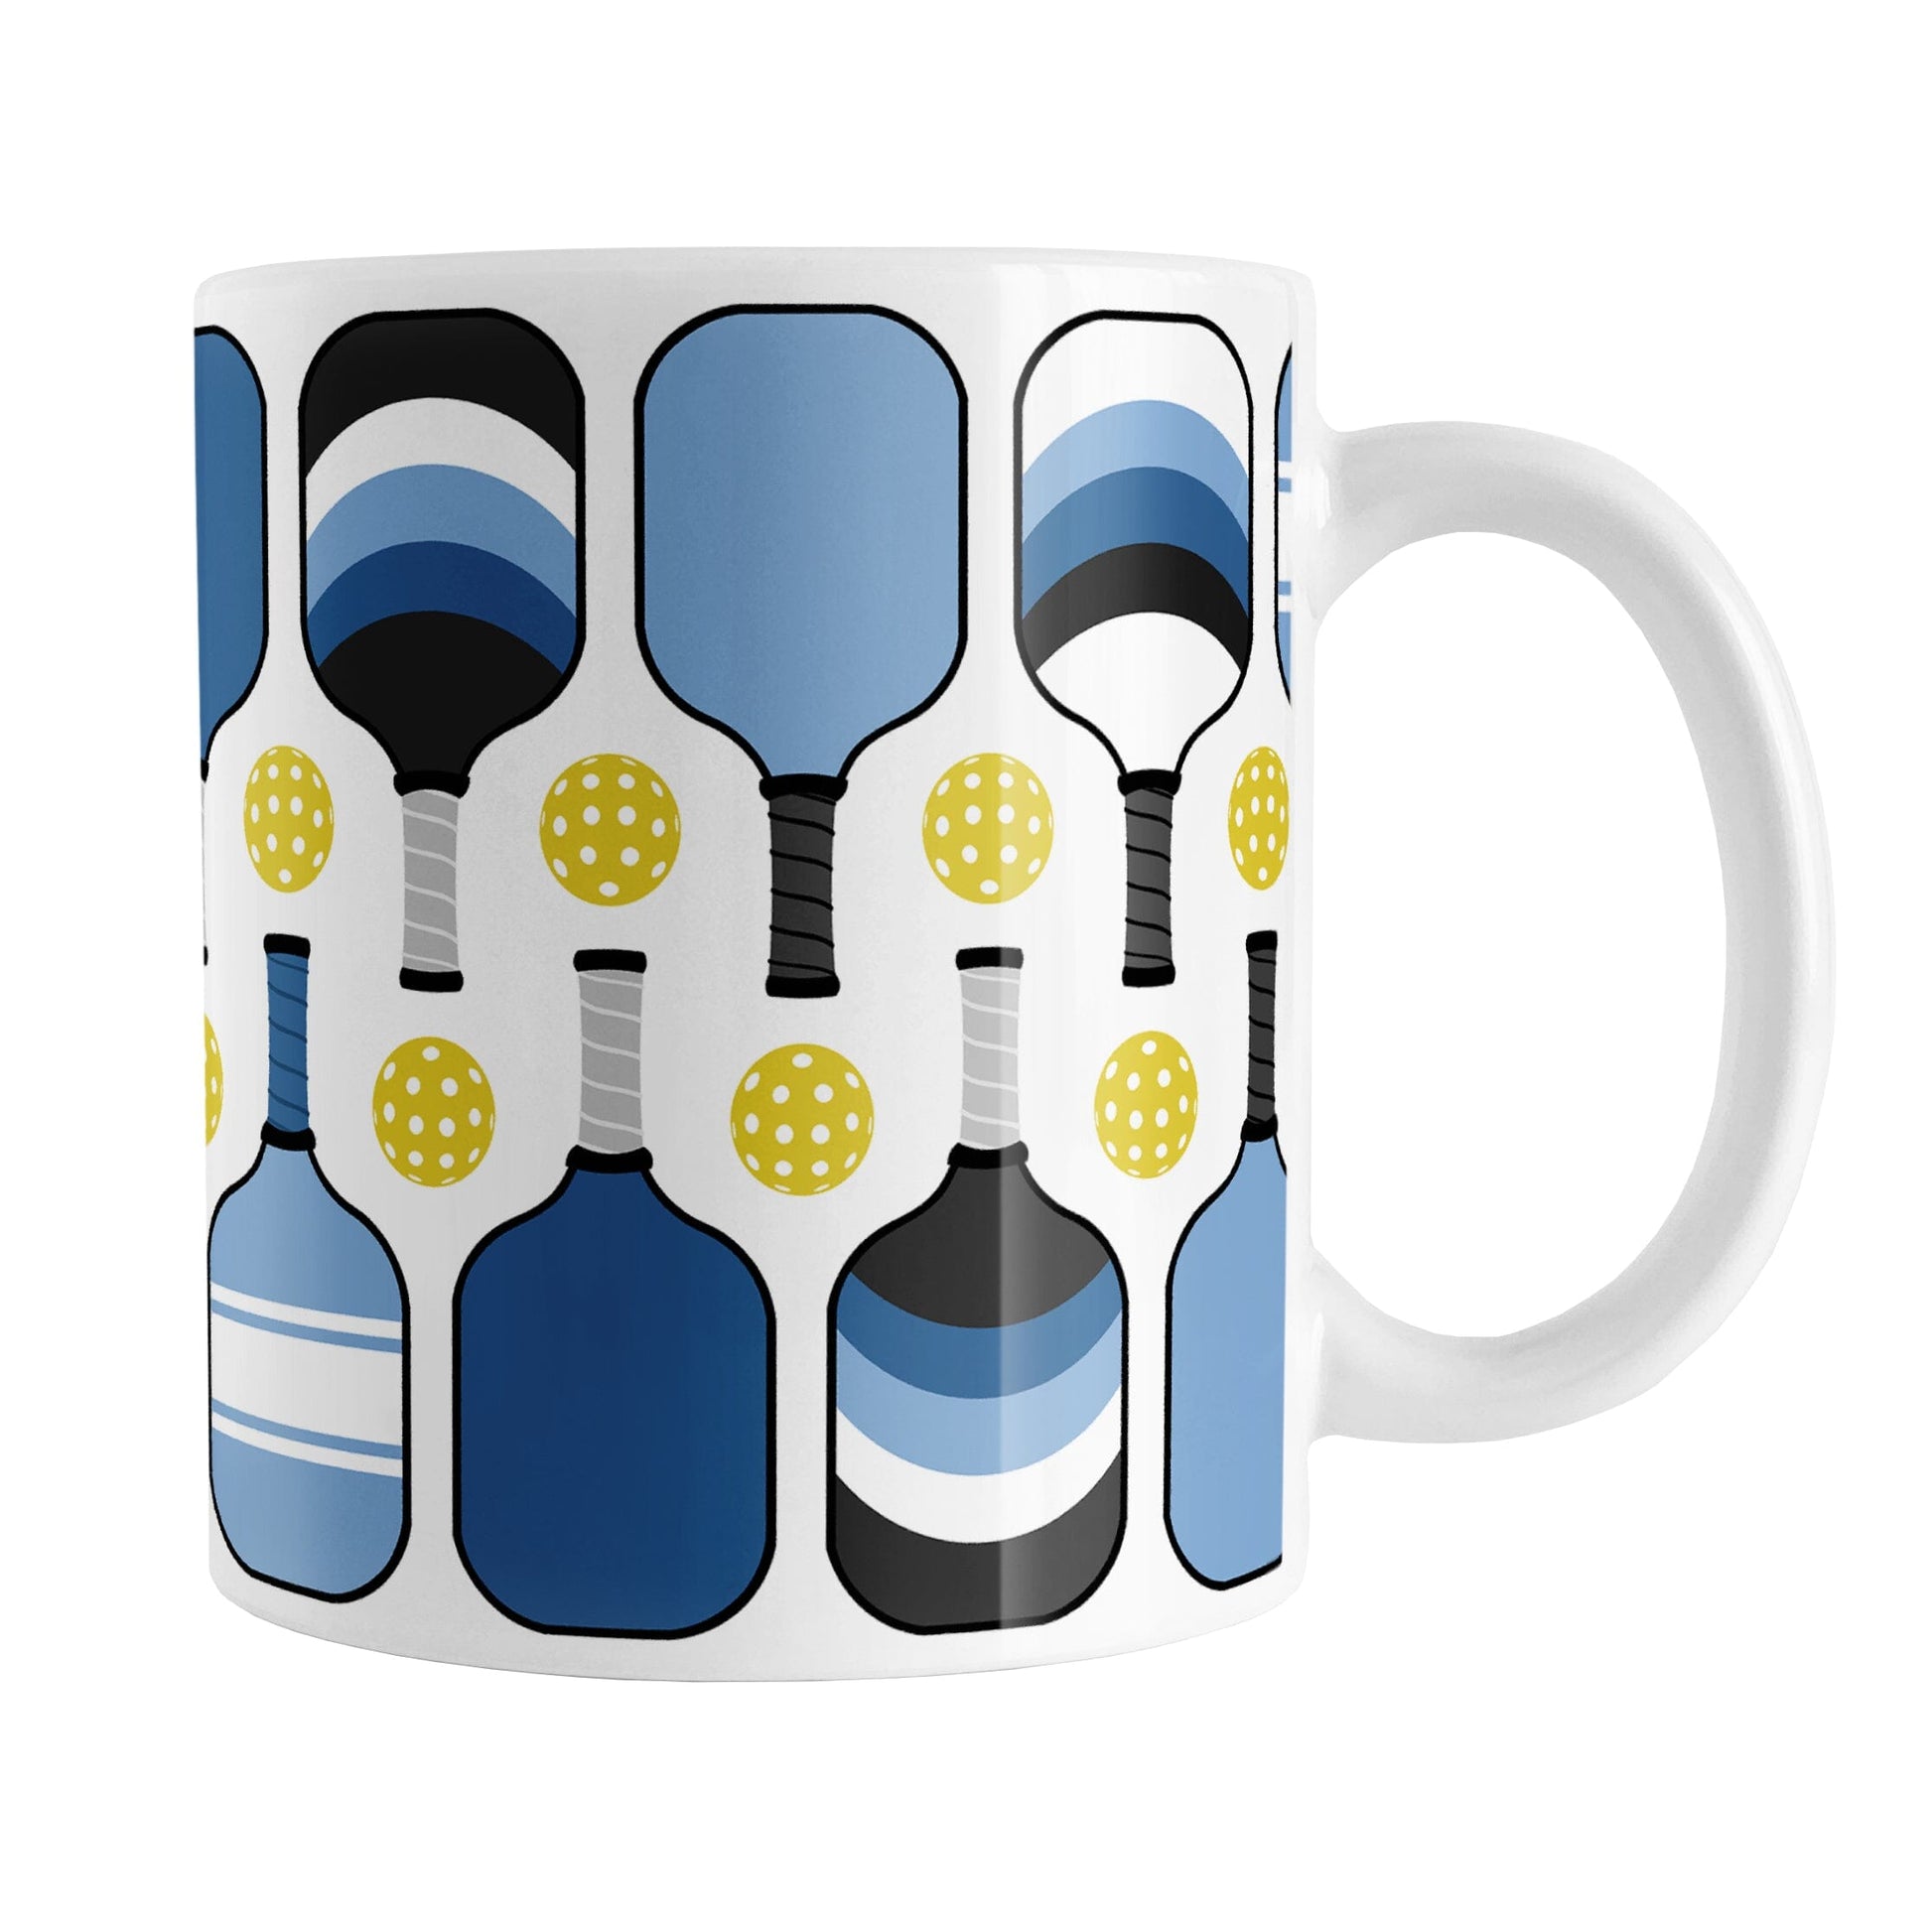 Blue Pickleball Mug (11oz) at Amy's Coffee Mugs. A ceramic coffee mug designed with modern blue pickleball paddles and yellow balls in a pattern that wraps around the mug up to the handle.